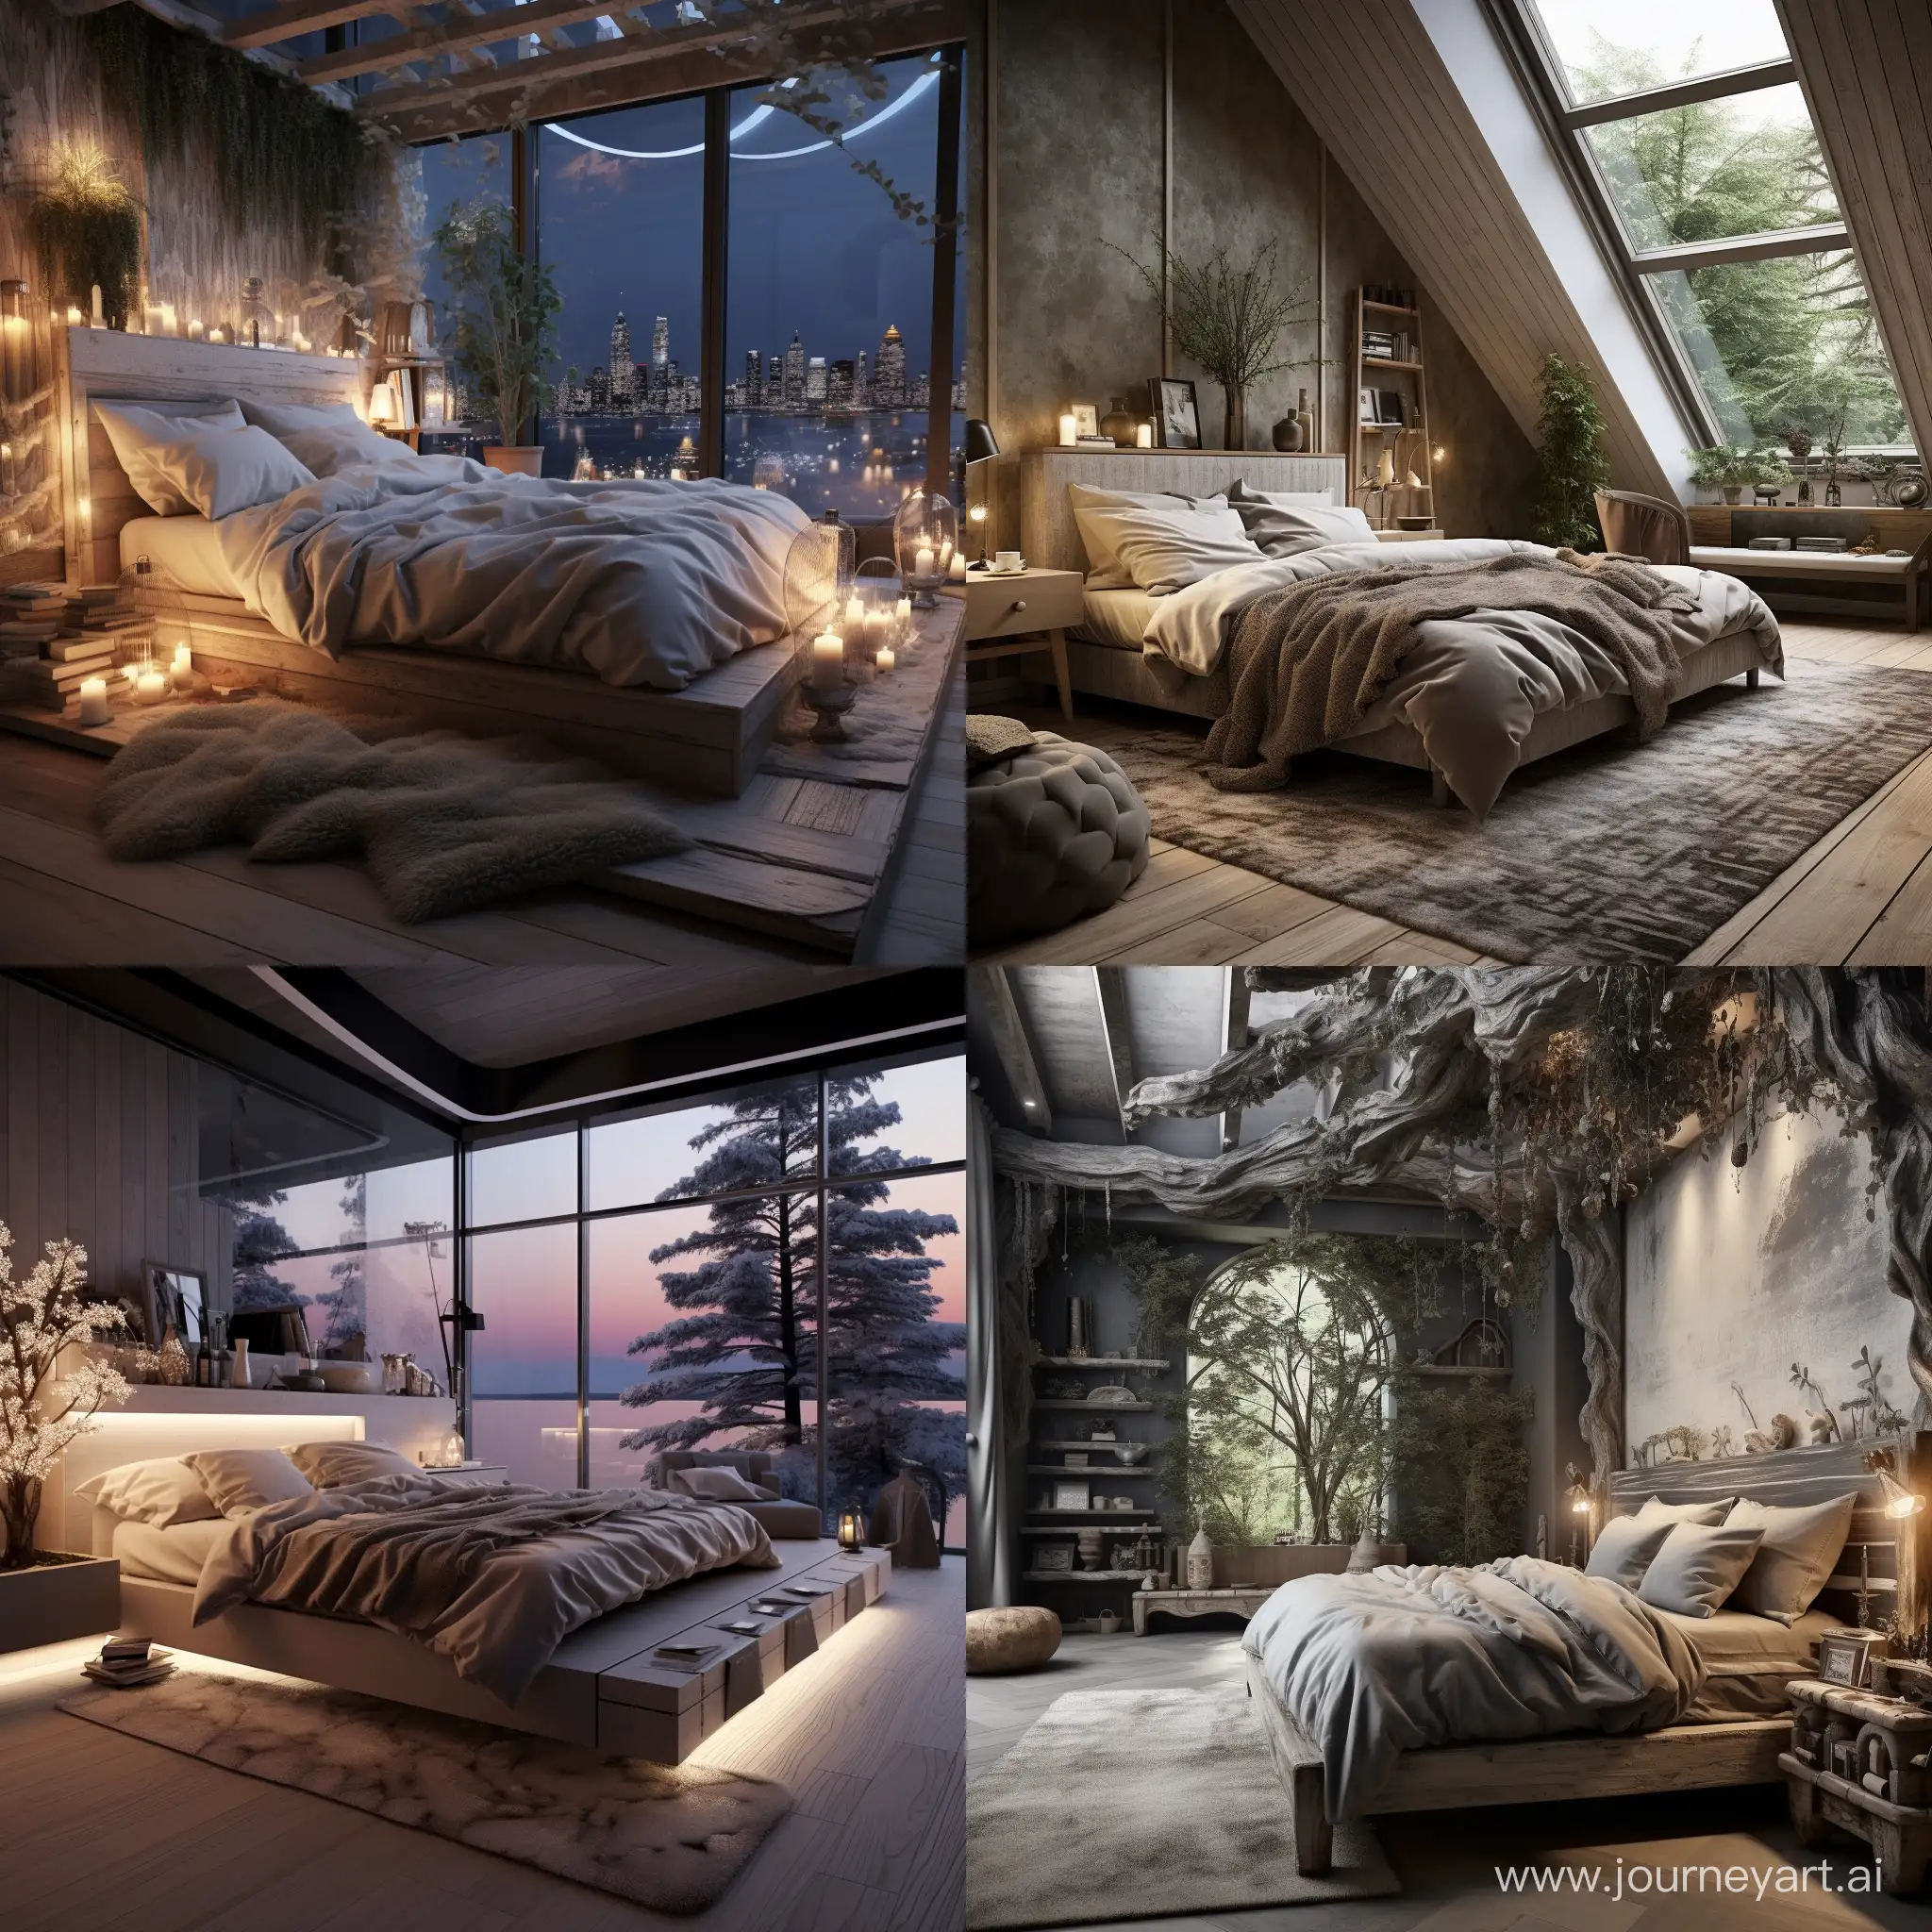 Elegant-Adult-Bedroom-with-a-Square-Aspect-Ratio